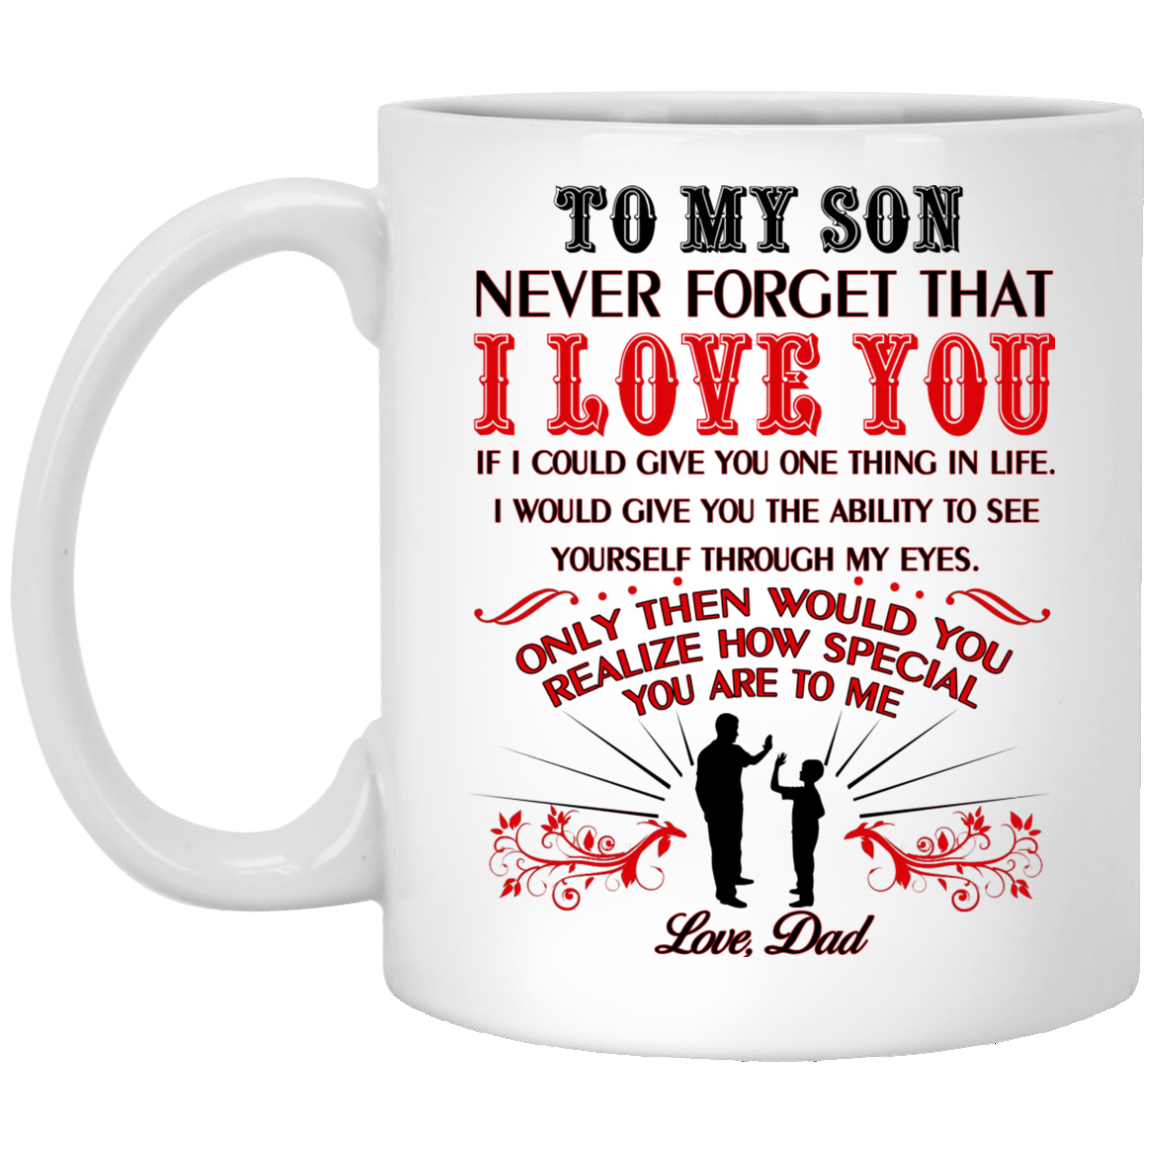 To My Son Love Dad Mug - Never forget that I love you